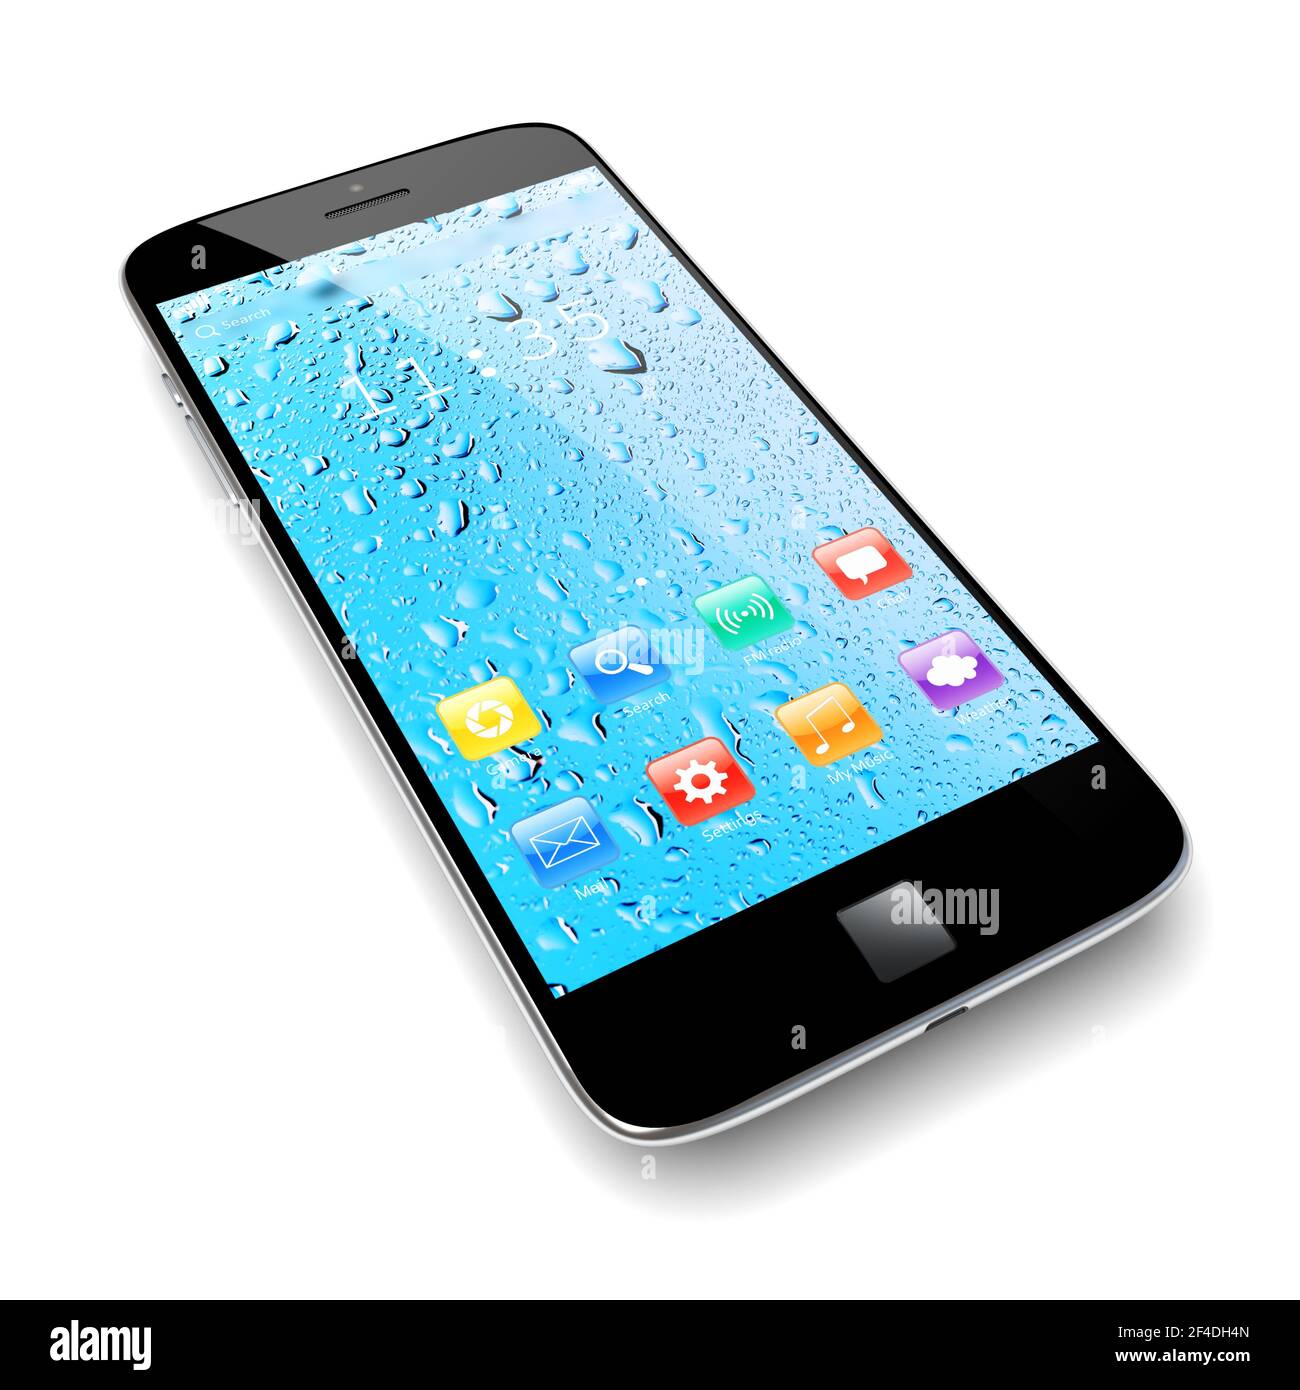 Mobile smartphone with colorful apps on a water drop screen wallpaper. 3d image Stock Photo